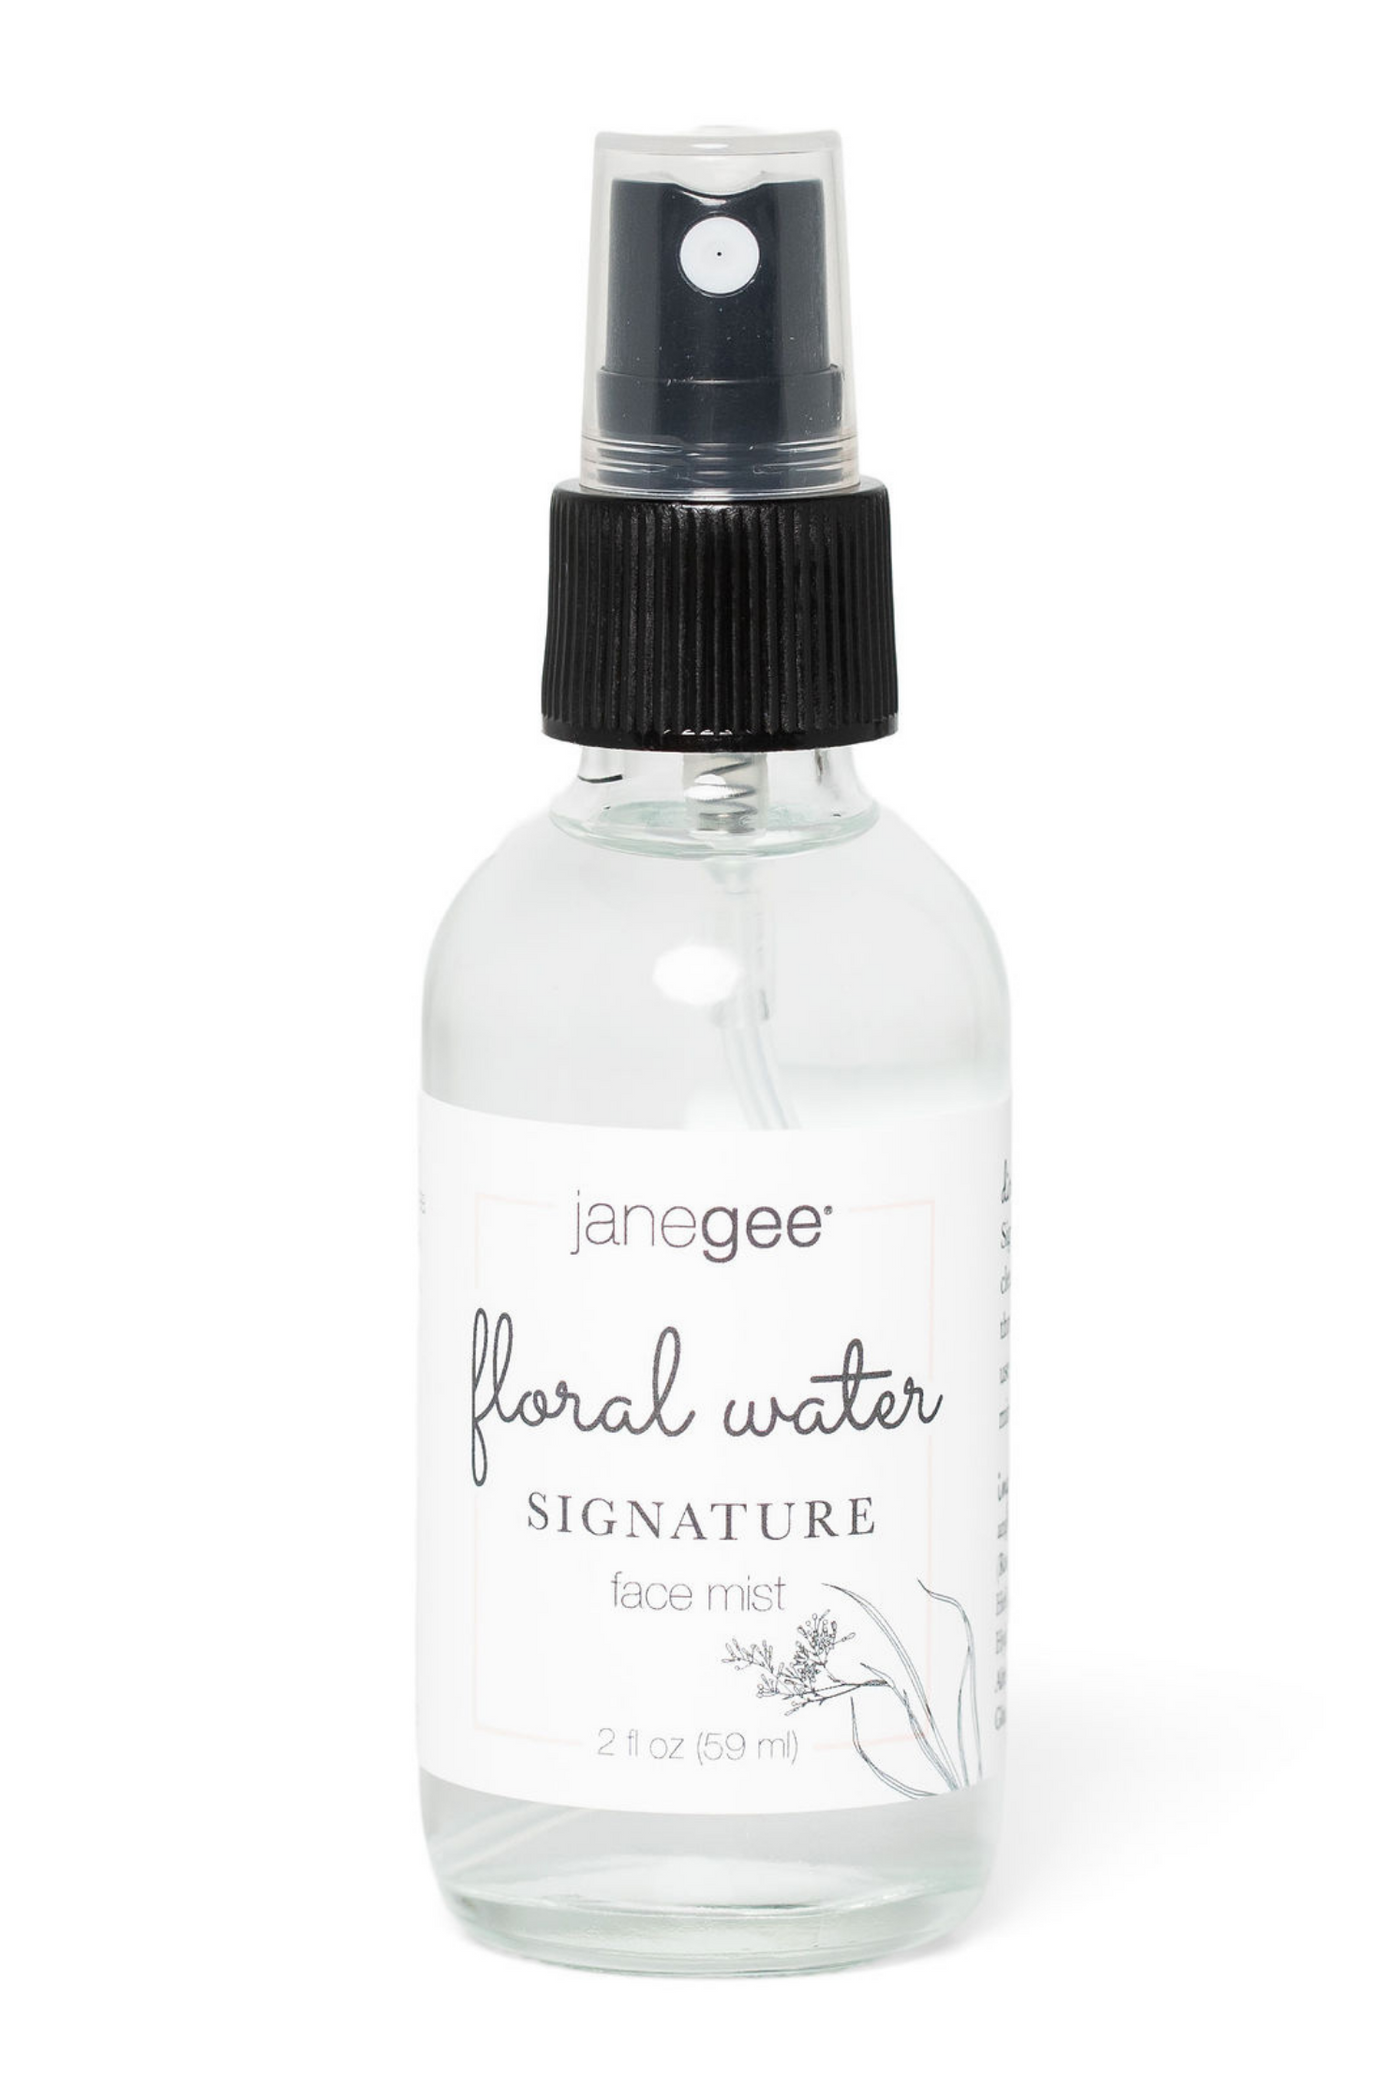 janegee Signature Floral Water